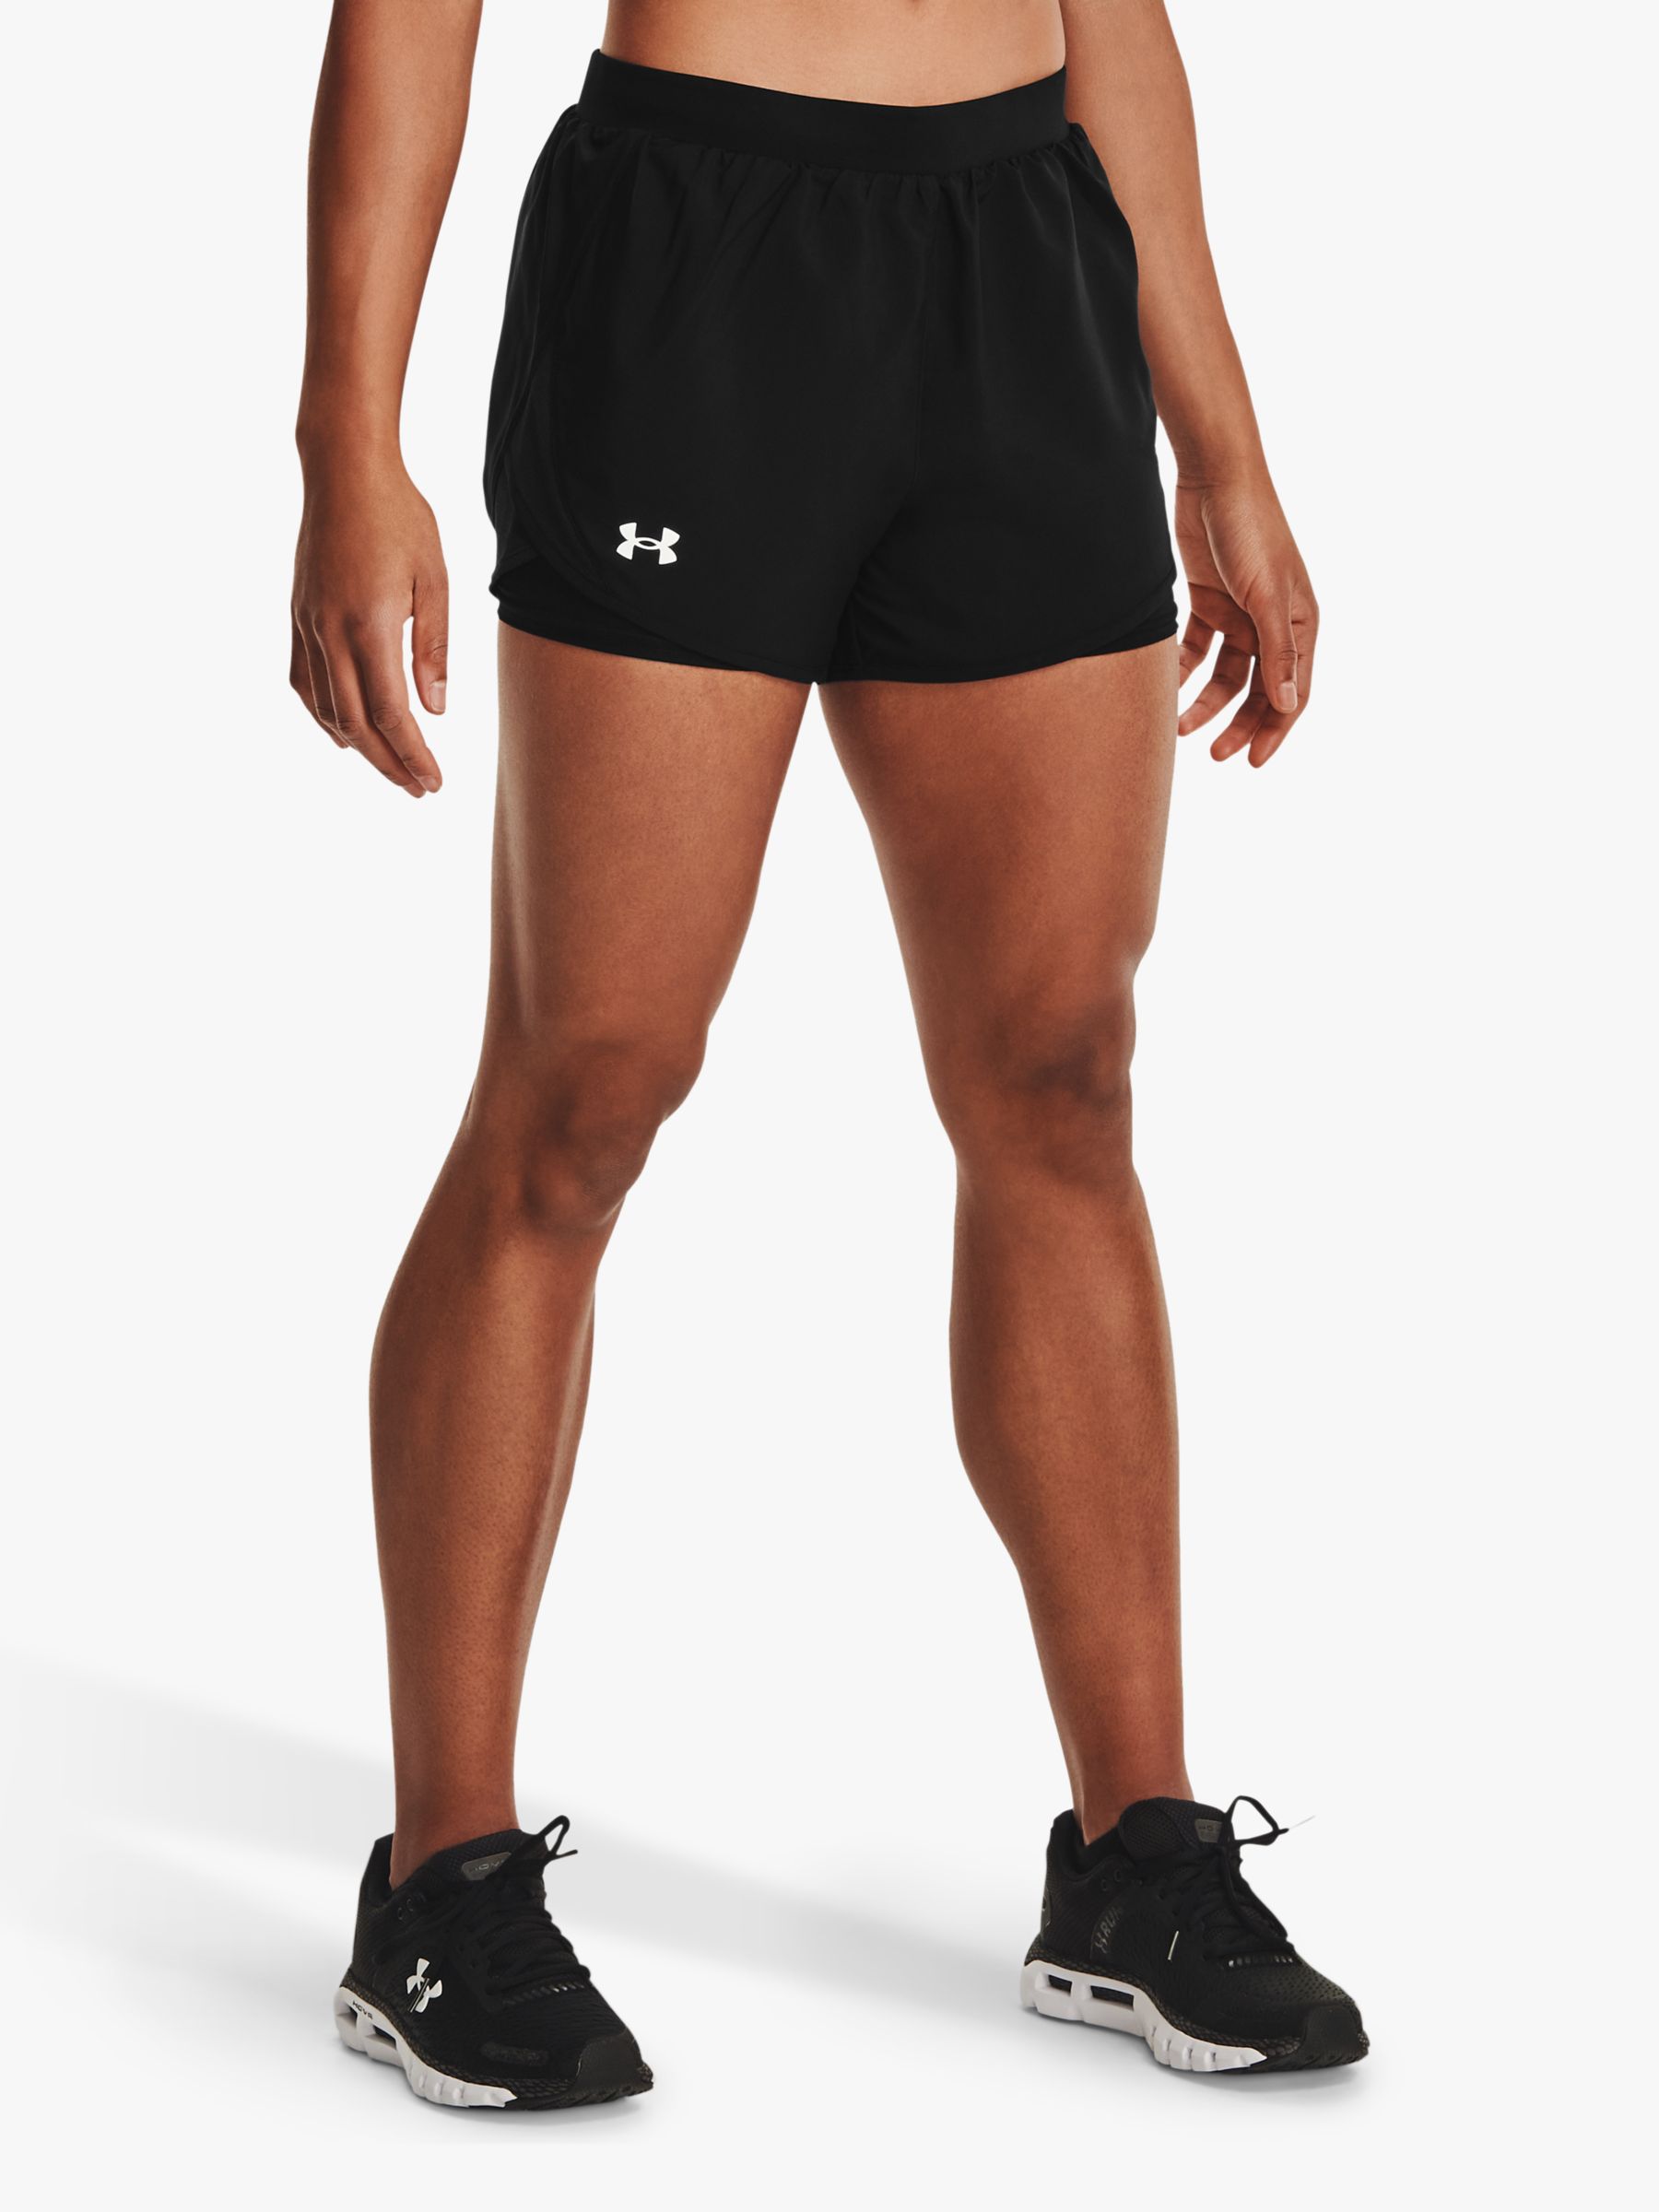 UNDER ARMOUR COMPRESSION SHORT TIGHT WOMENS LADIES RACER RUNNING FITNESS  BLACK 